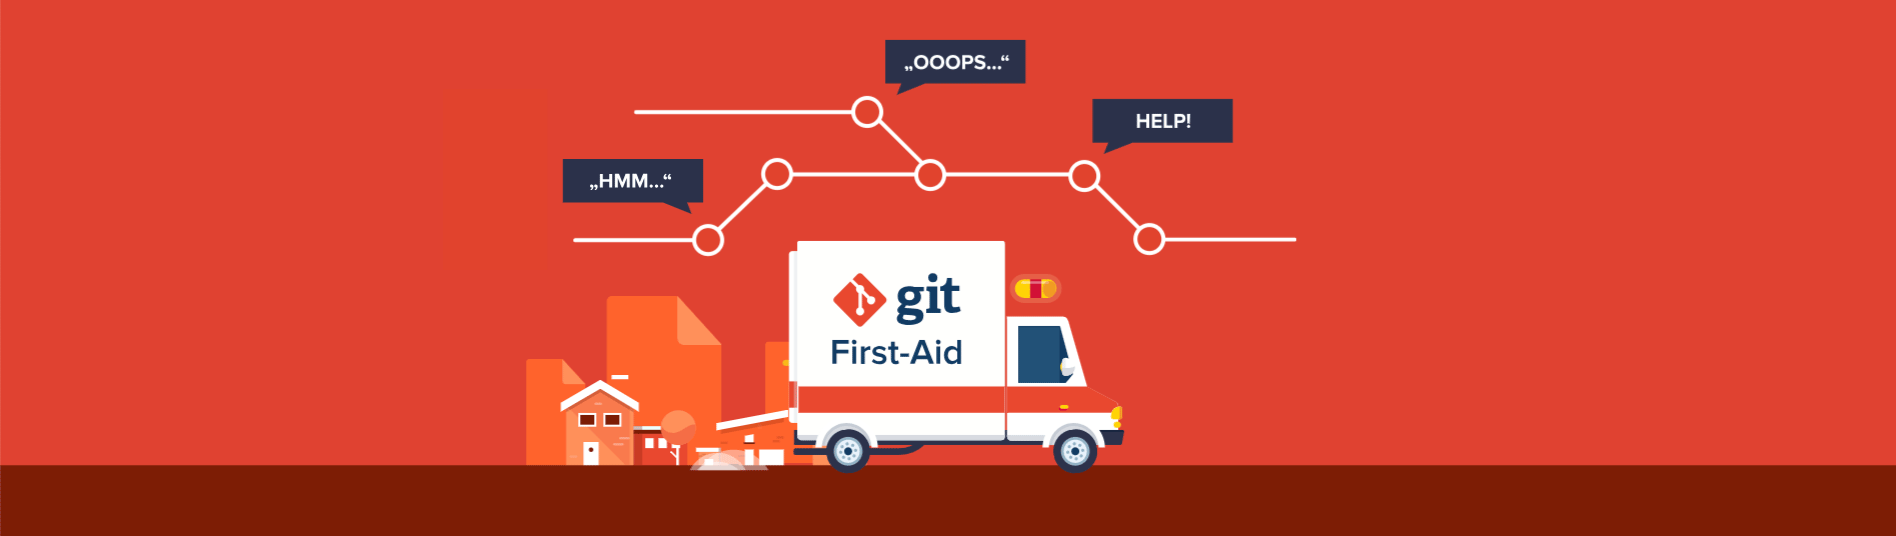 First Aid Kit for Git